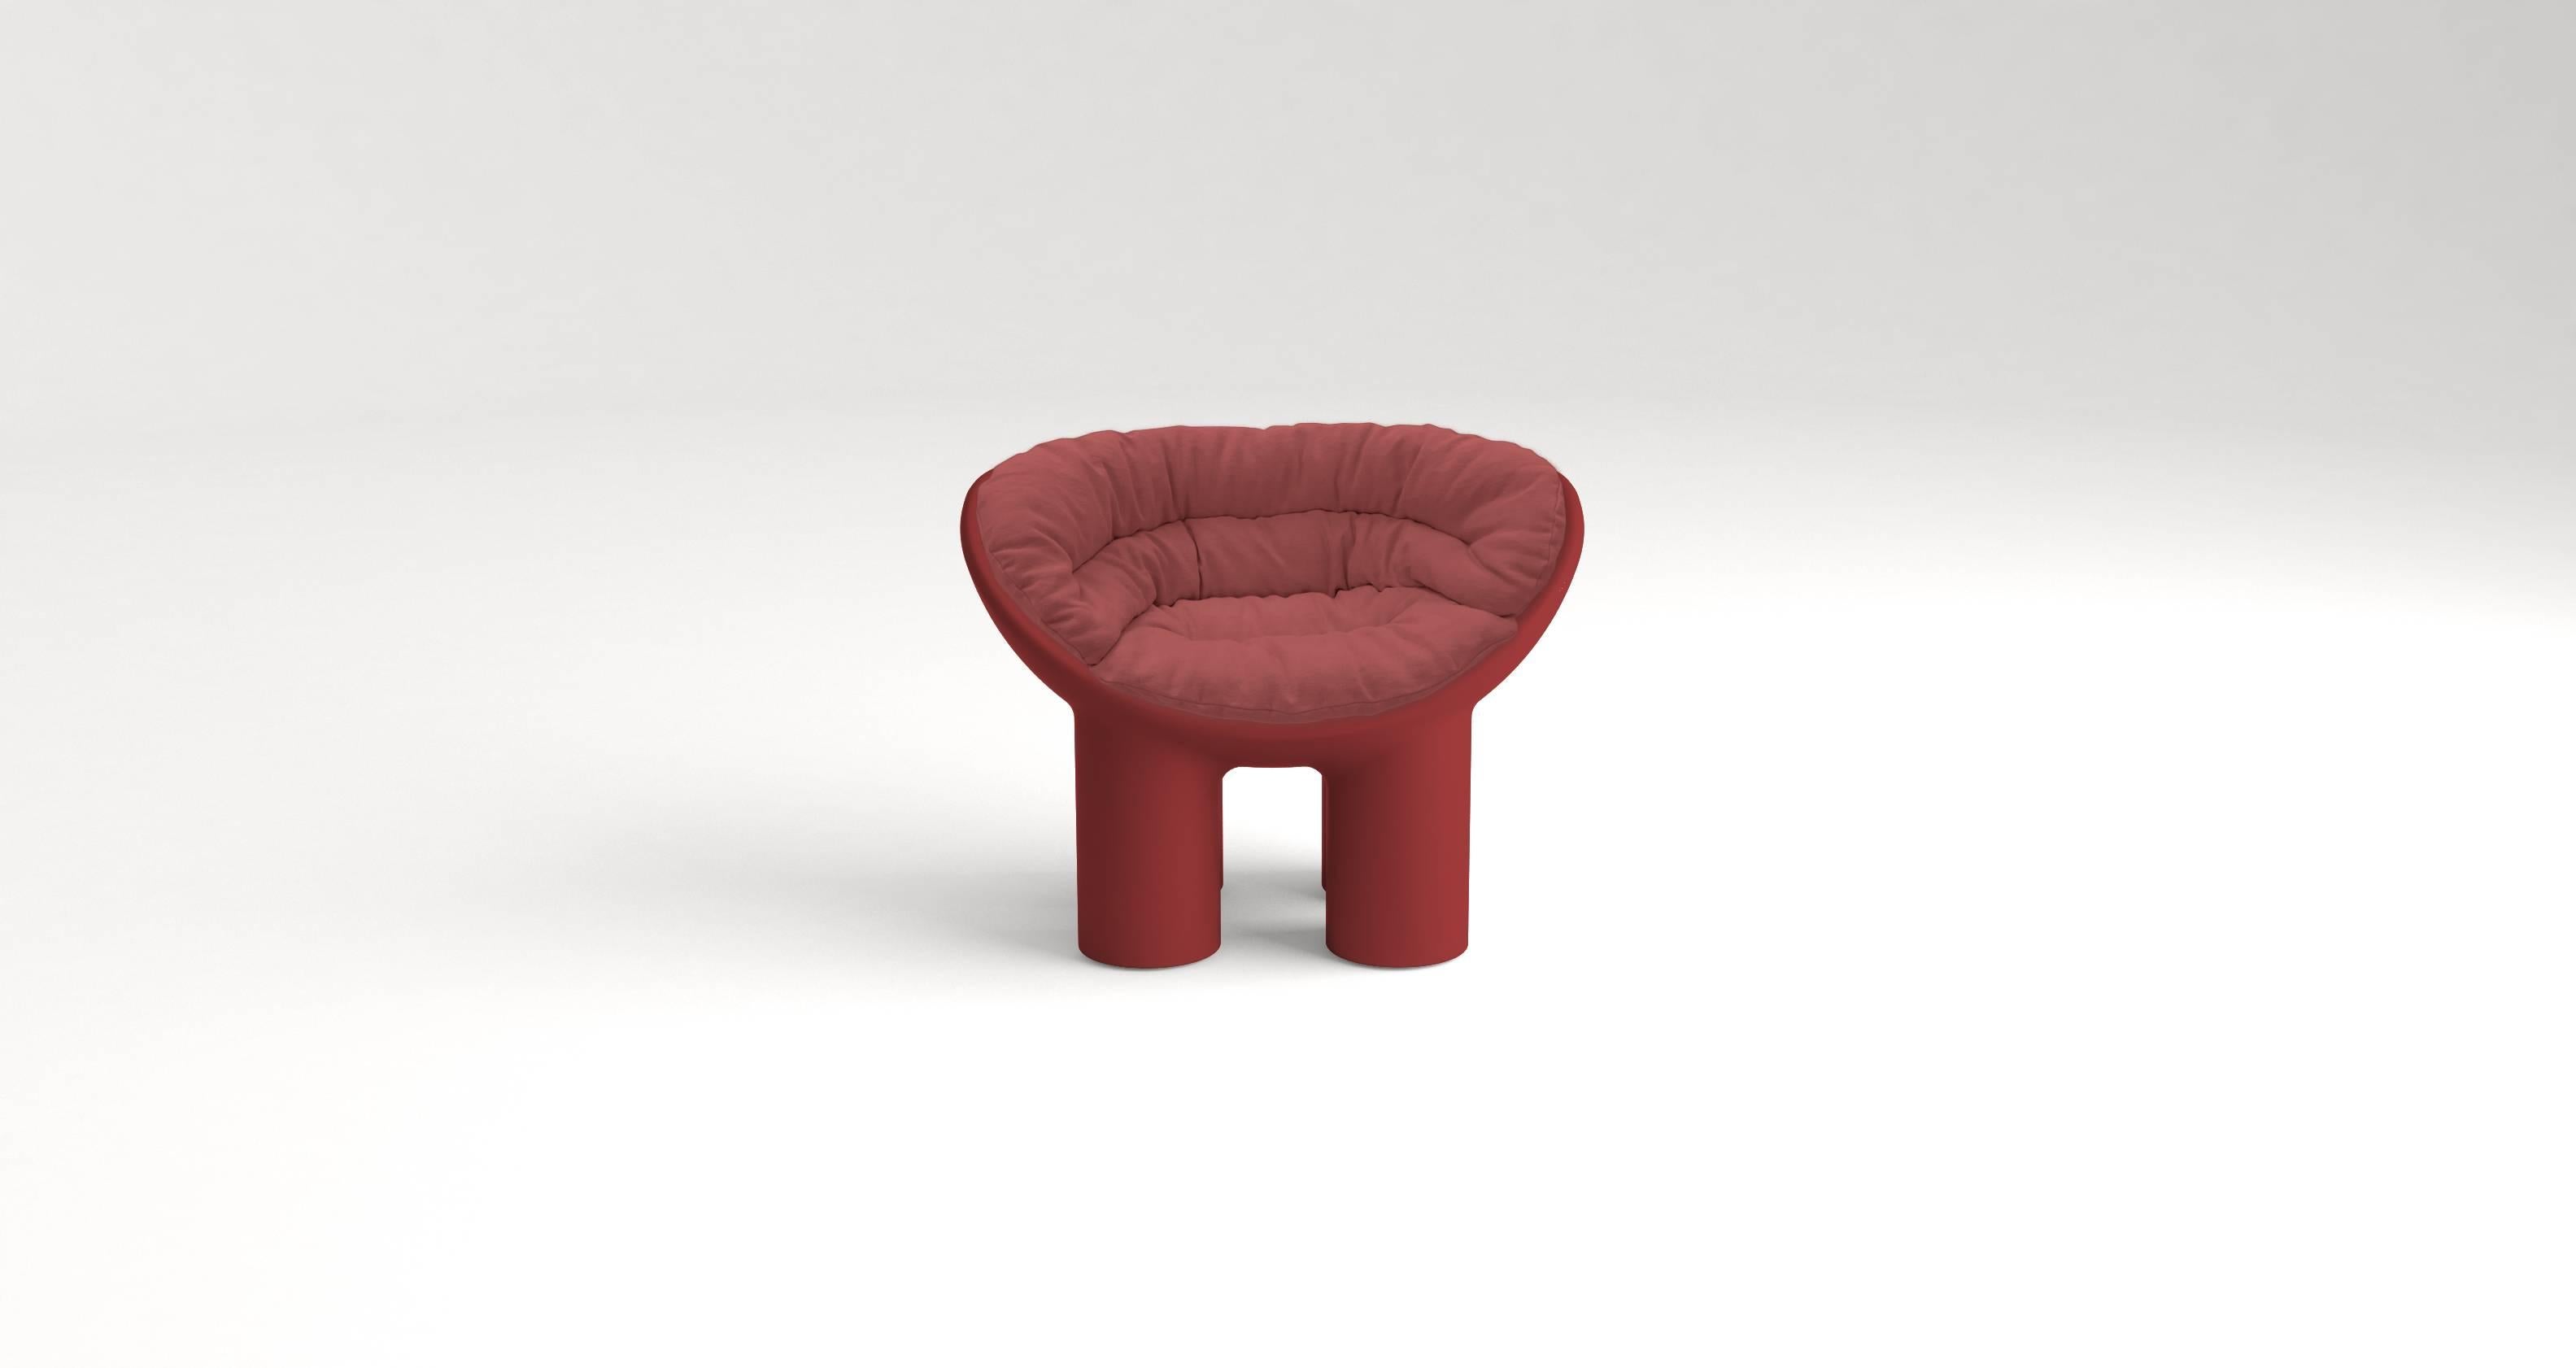 roly poly chair cushion